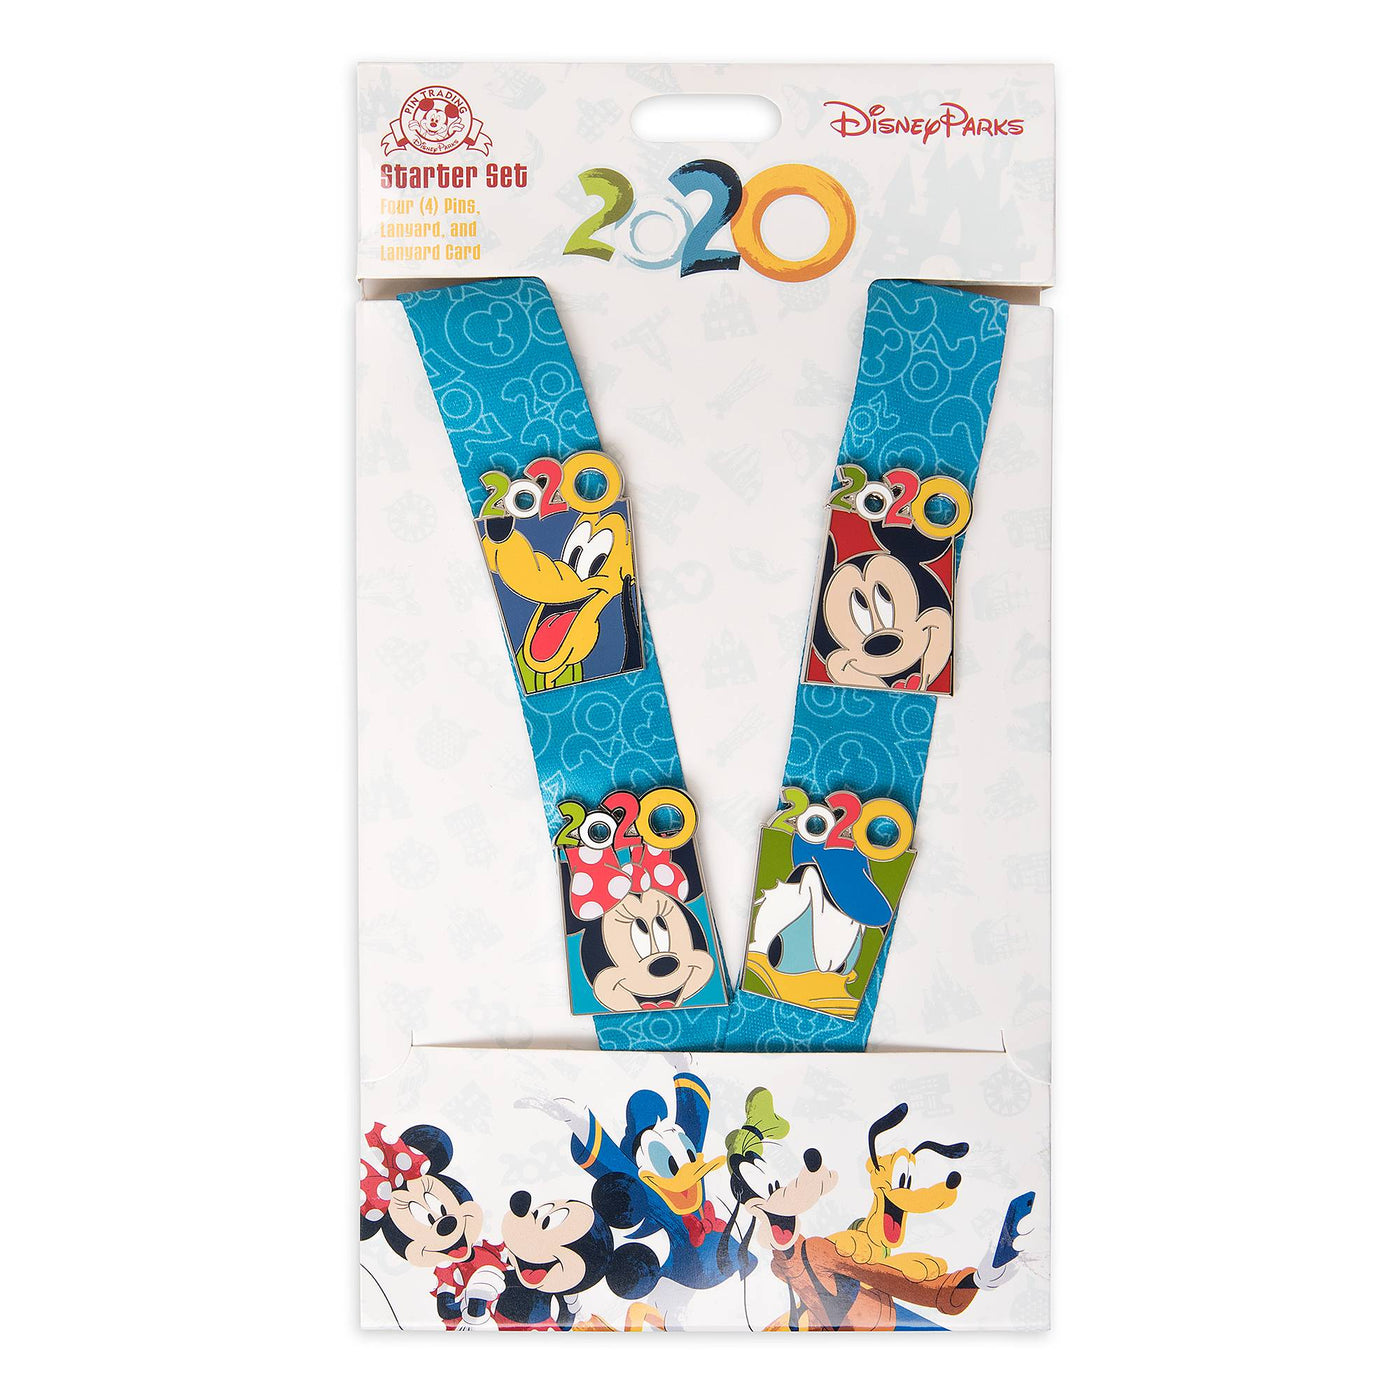 Disney Parks Mickey Mouse and Friends Pin Trading Starter Set 2020 New